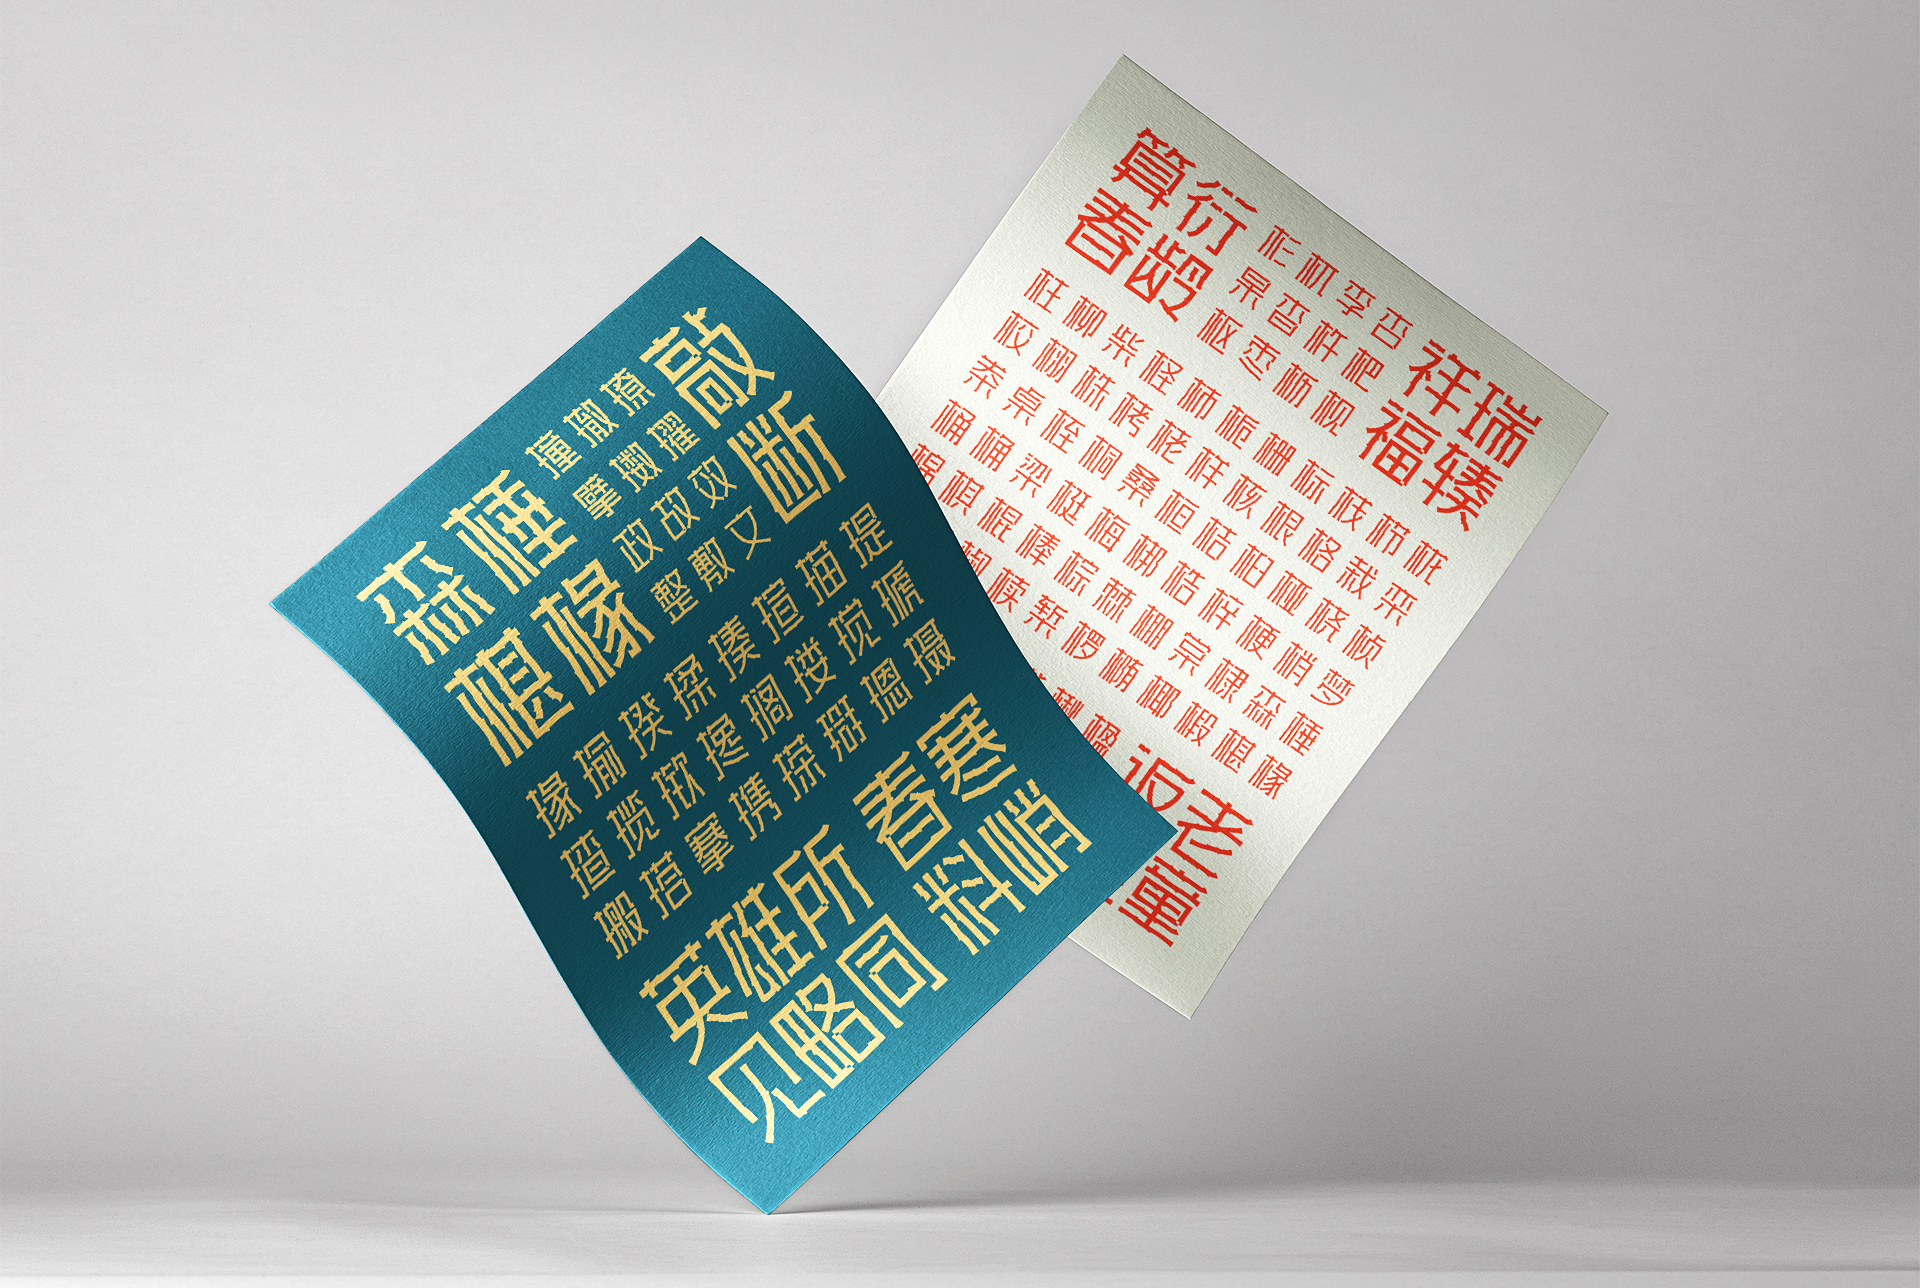 26P Collection of the latest Chinese font design schemes in 2021 #.297